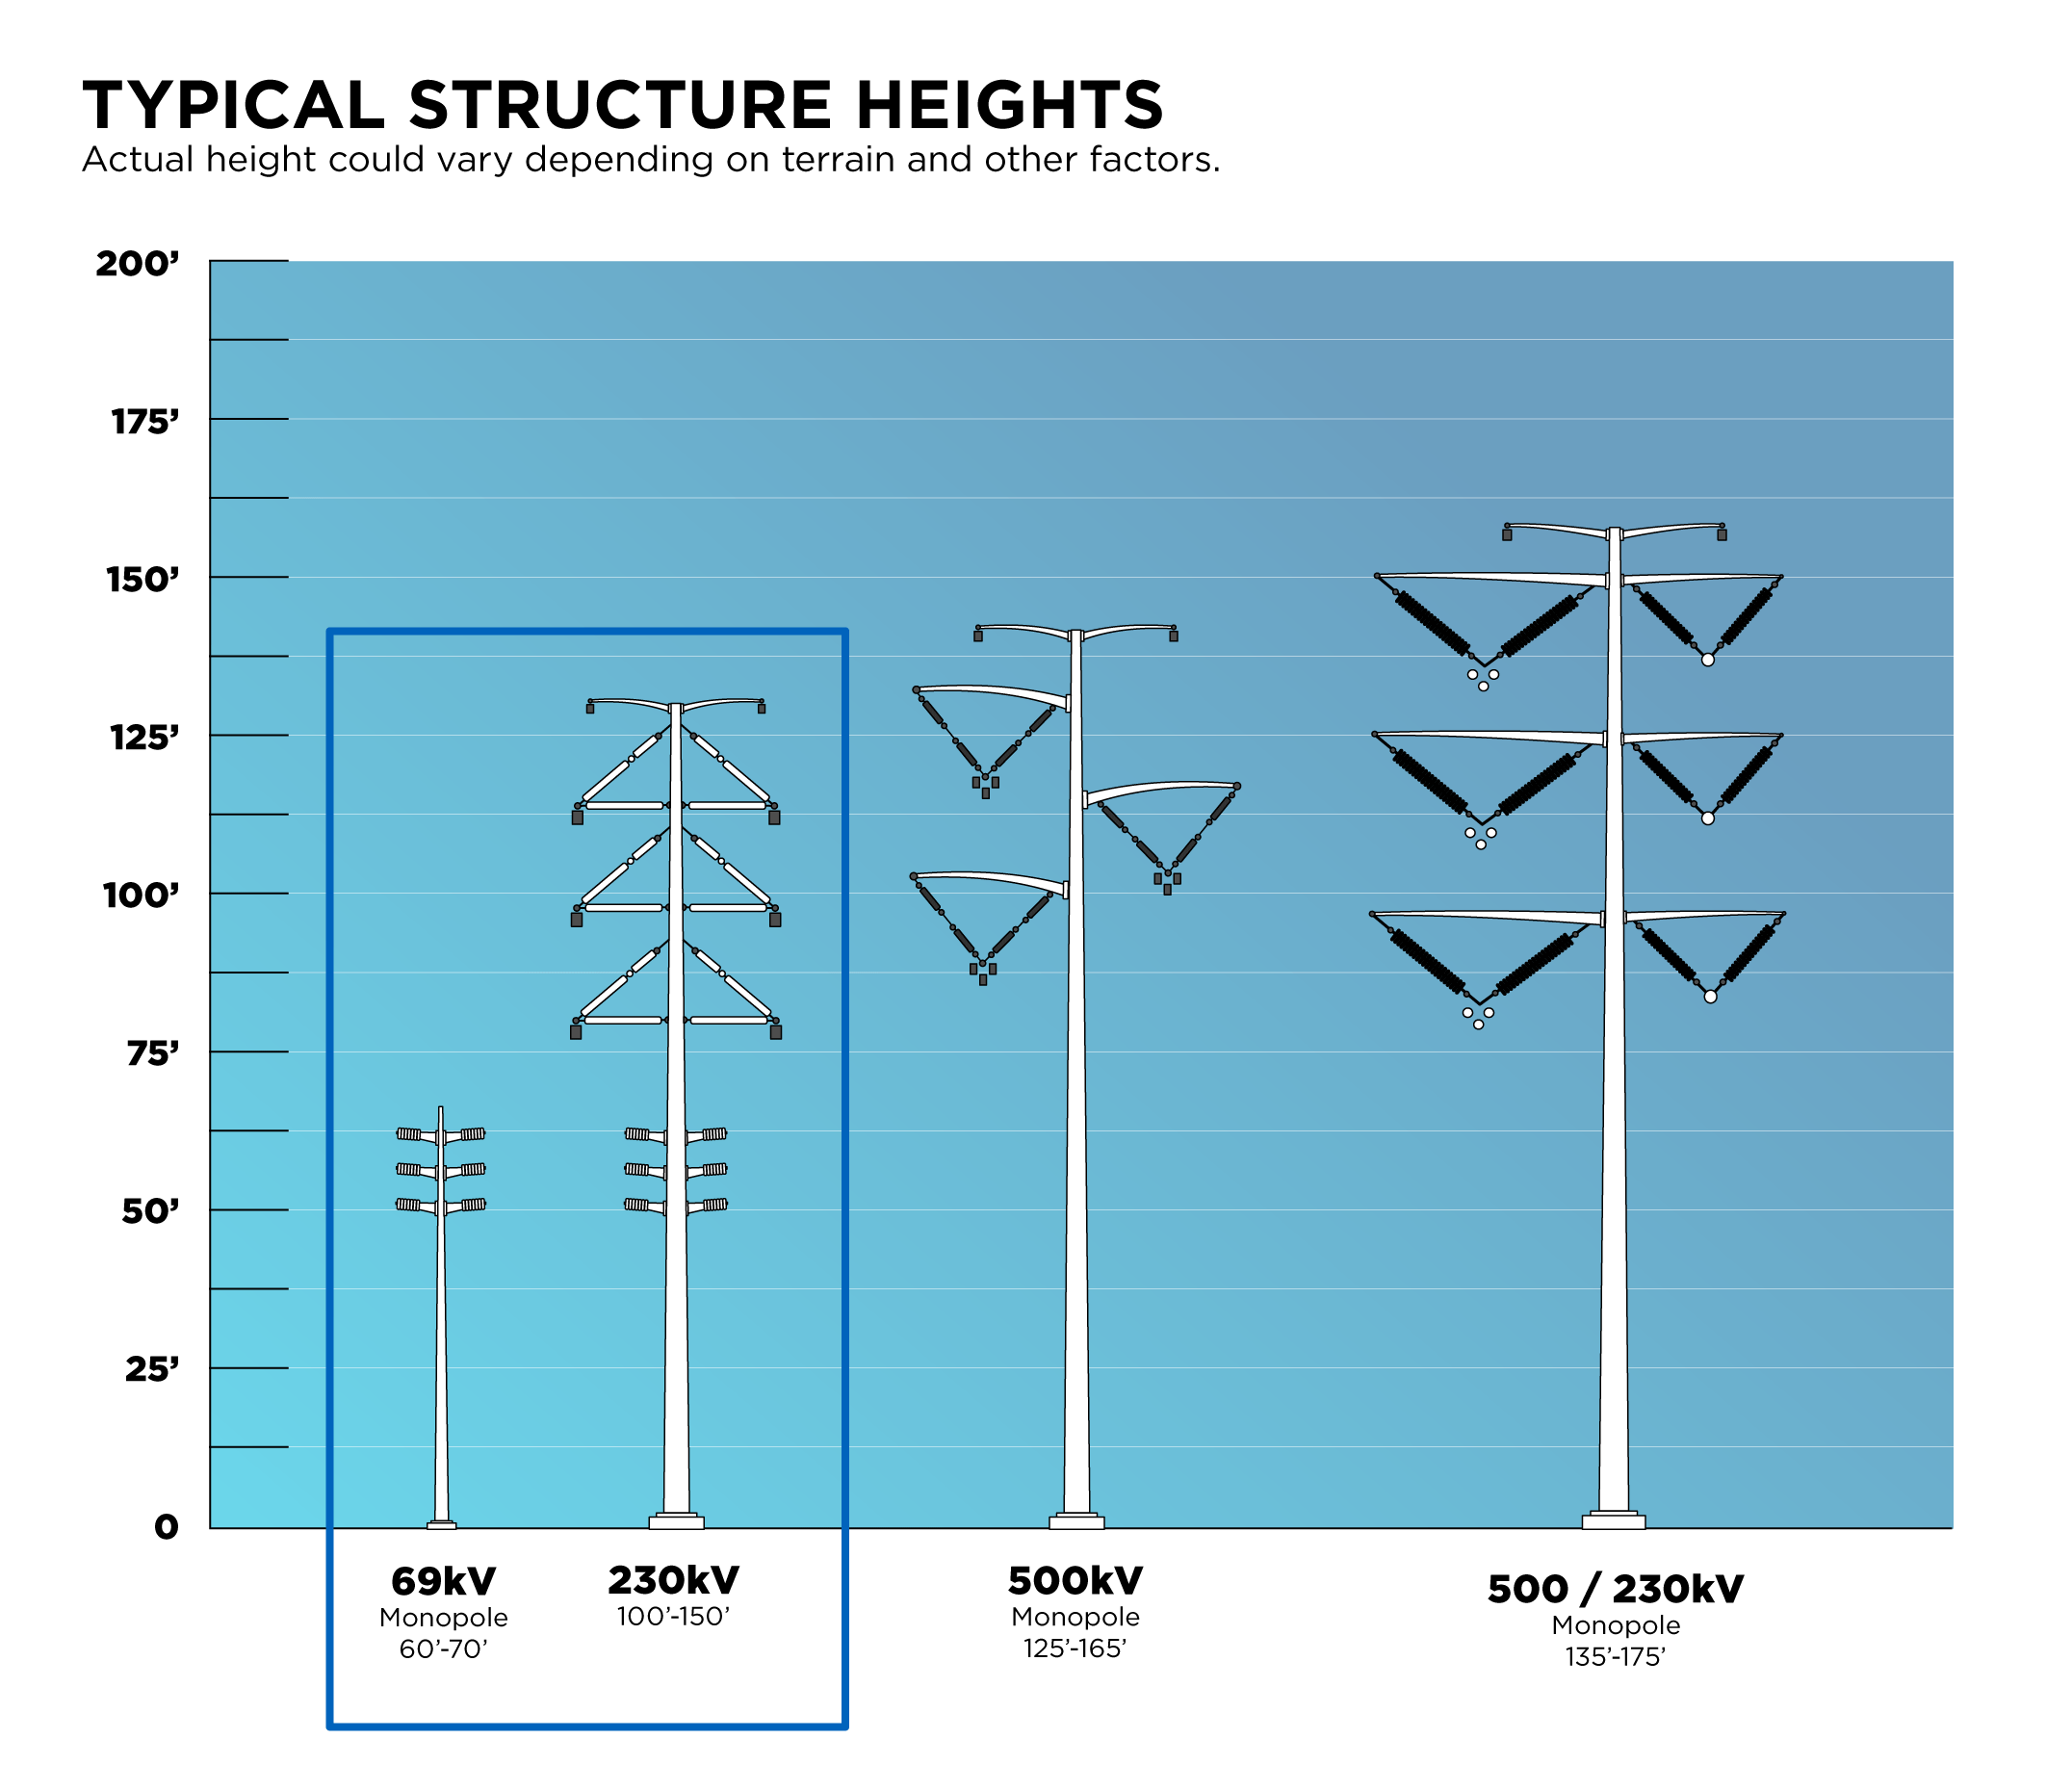 Schematic of 69kV and 230kV poles